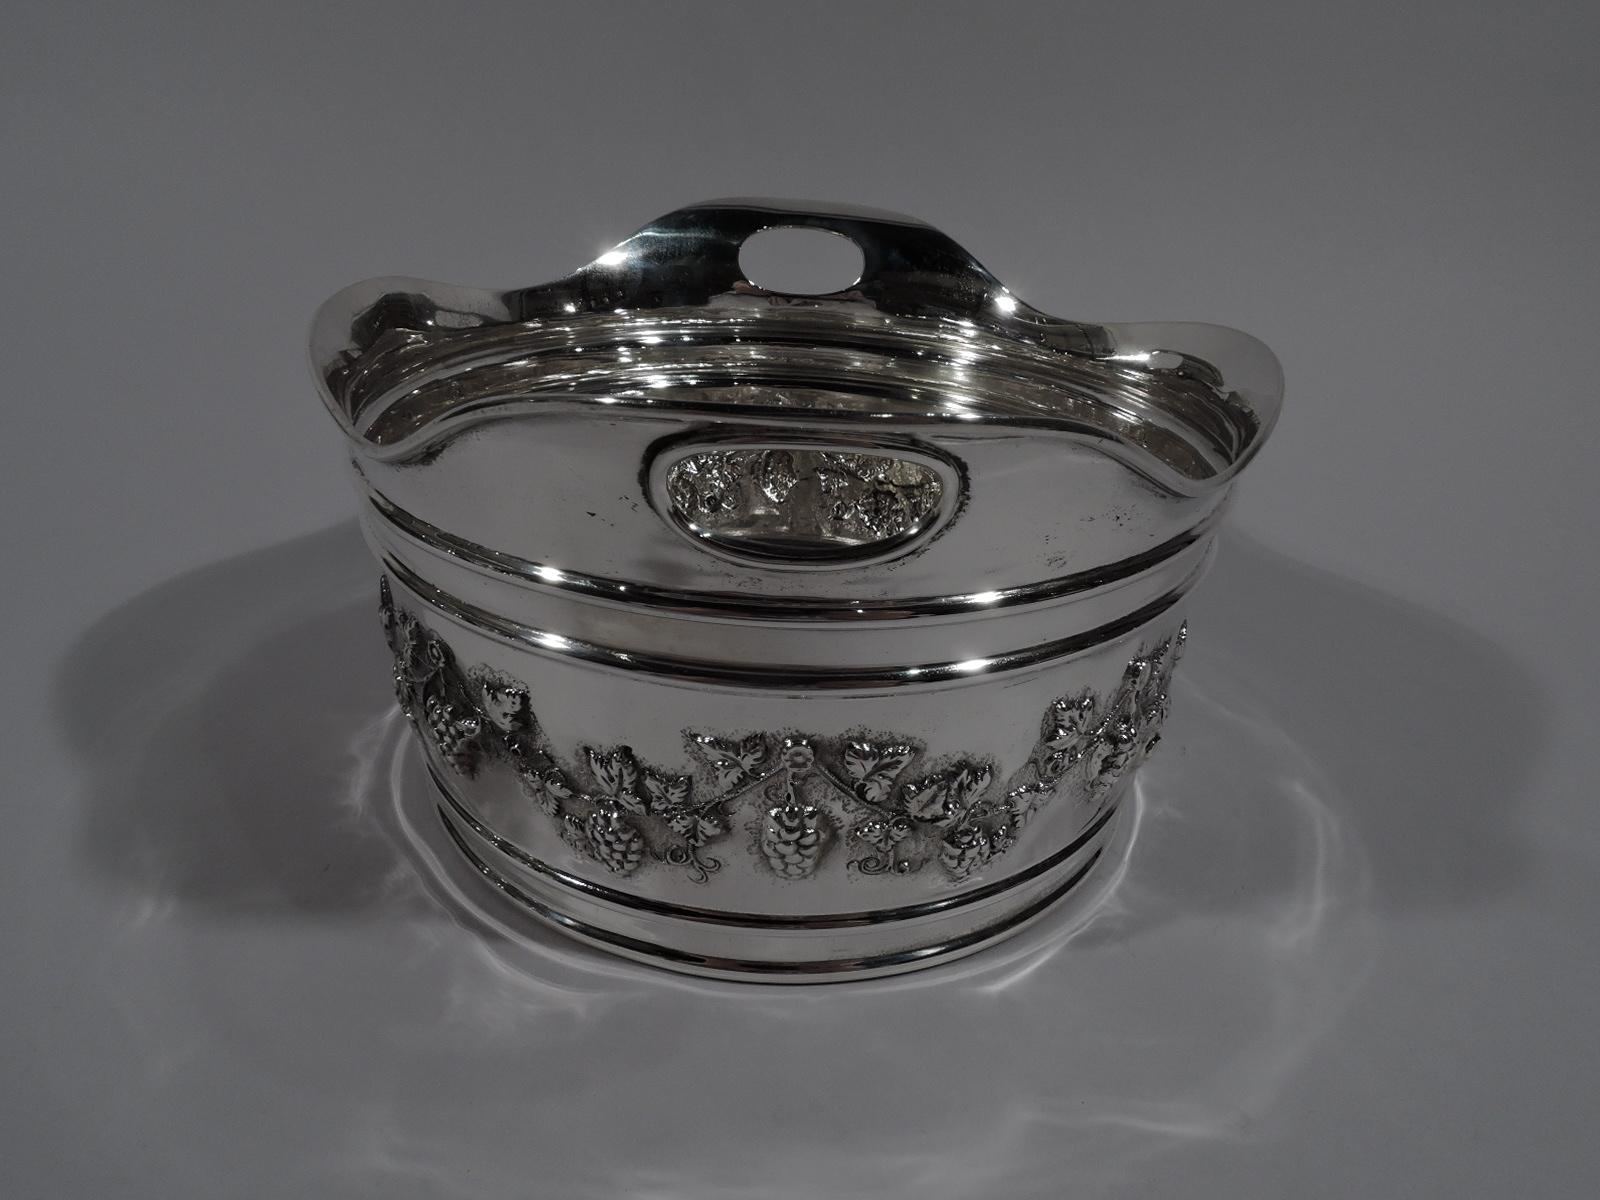 Turn-of-the-century Edwardian sterling silver ice bucket. Made by Duhme in Cincinnati, circa 1910. Round with wavy rim and cut out oval handles. Chased fruiting grapevine between barrel-like hoops. Bottom has raised concentric circles. Fully marked